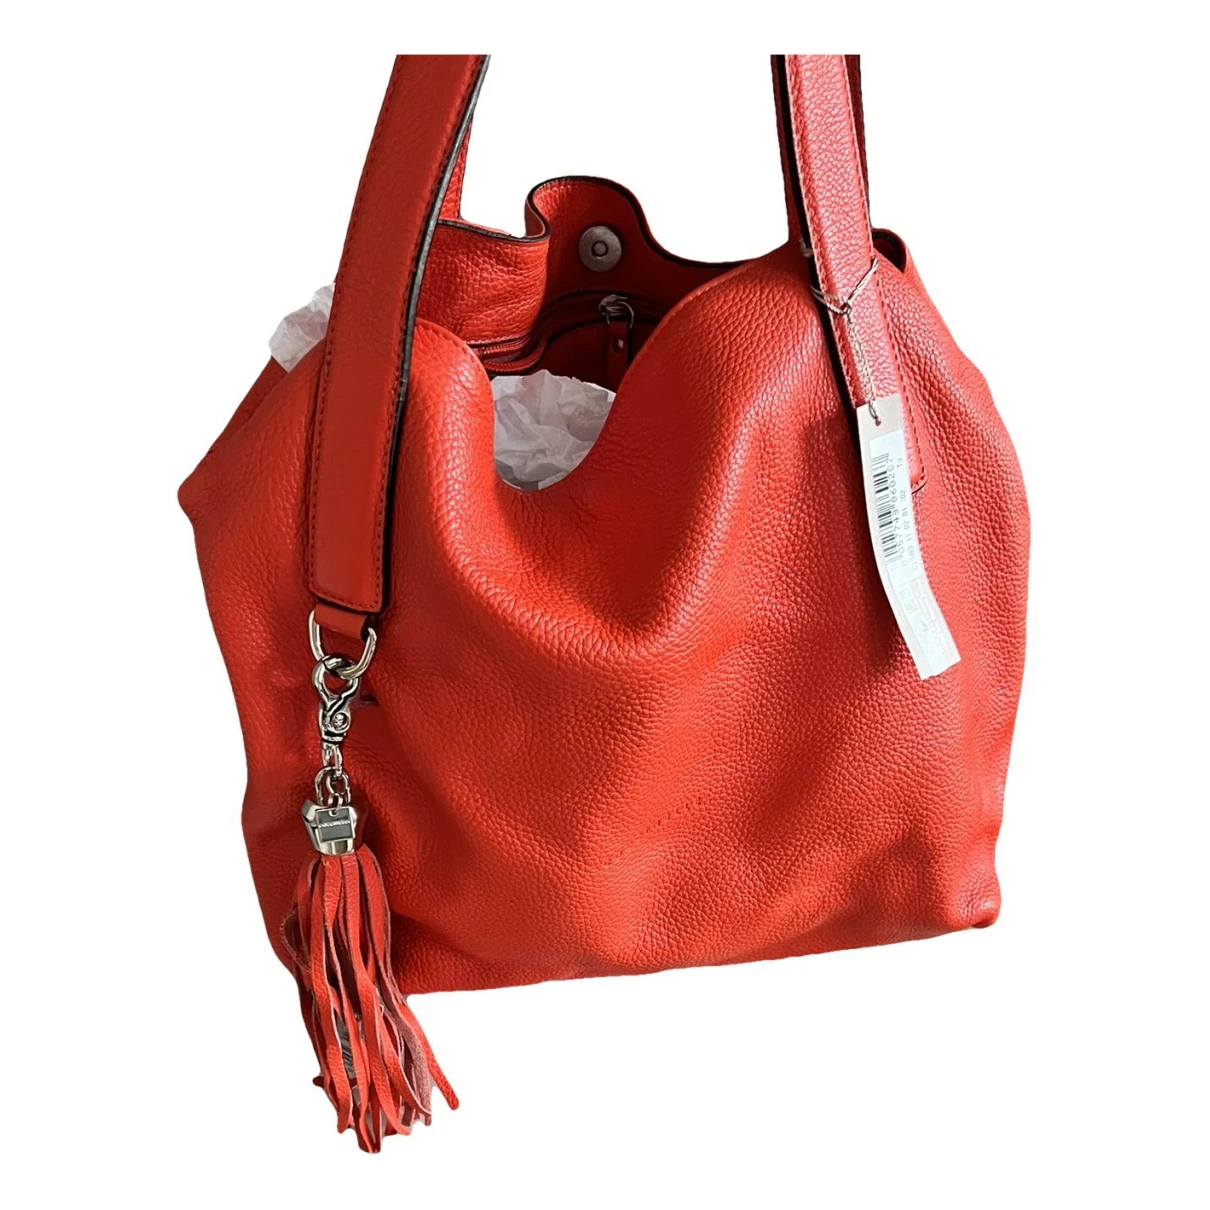 Pre-owned Coccinelle Leather Handbag In Orange